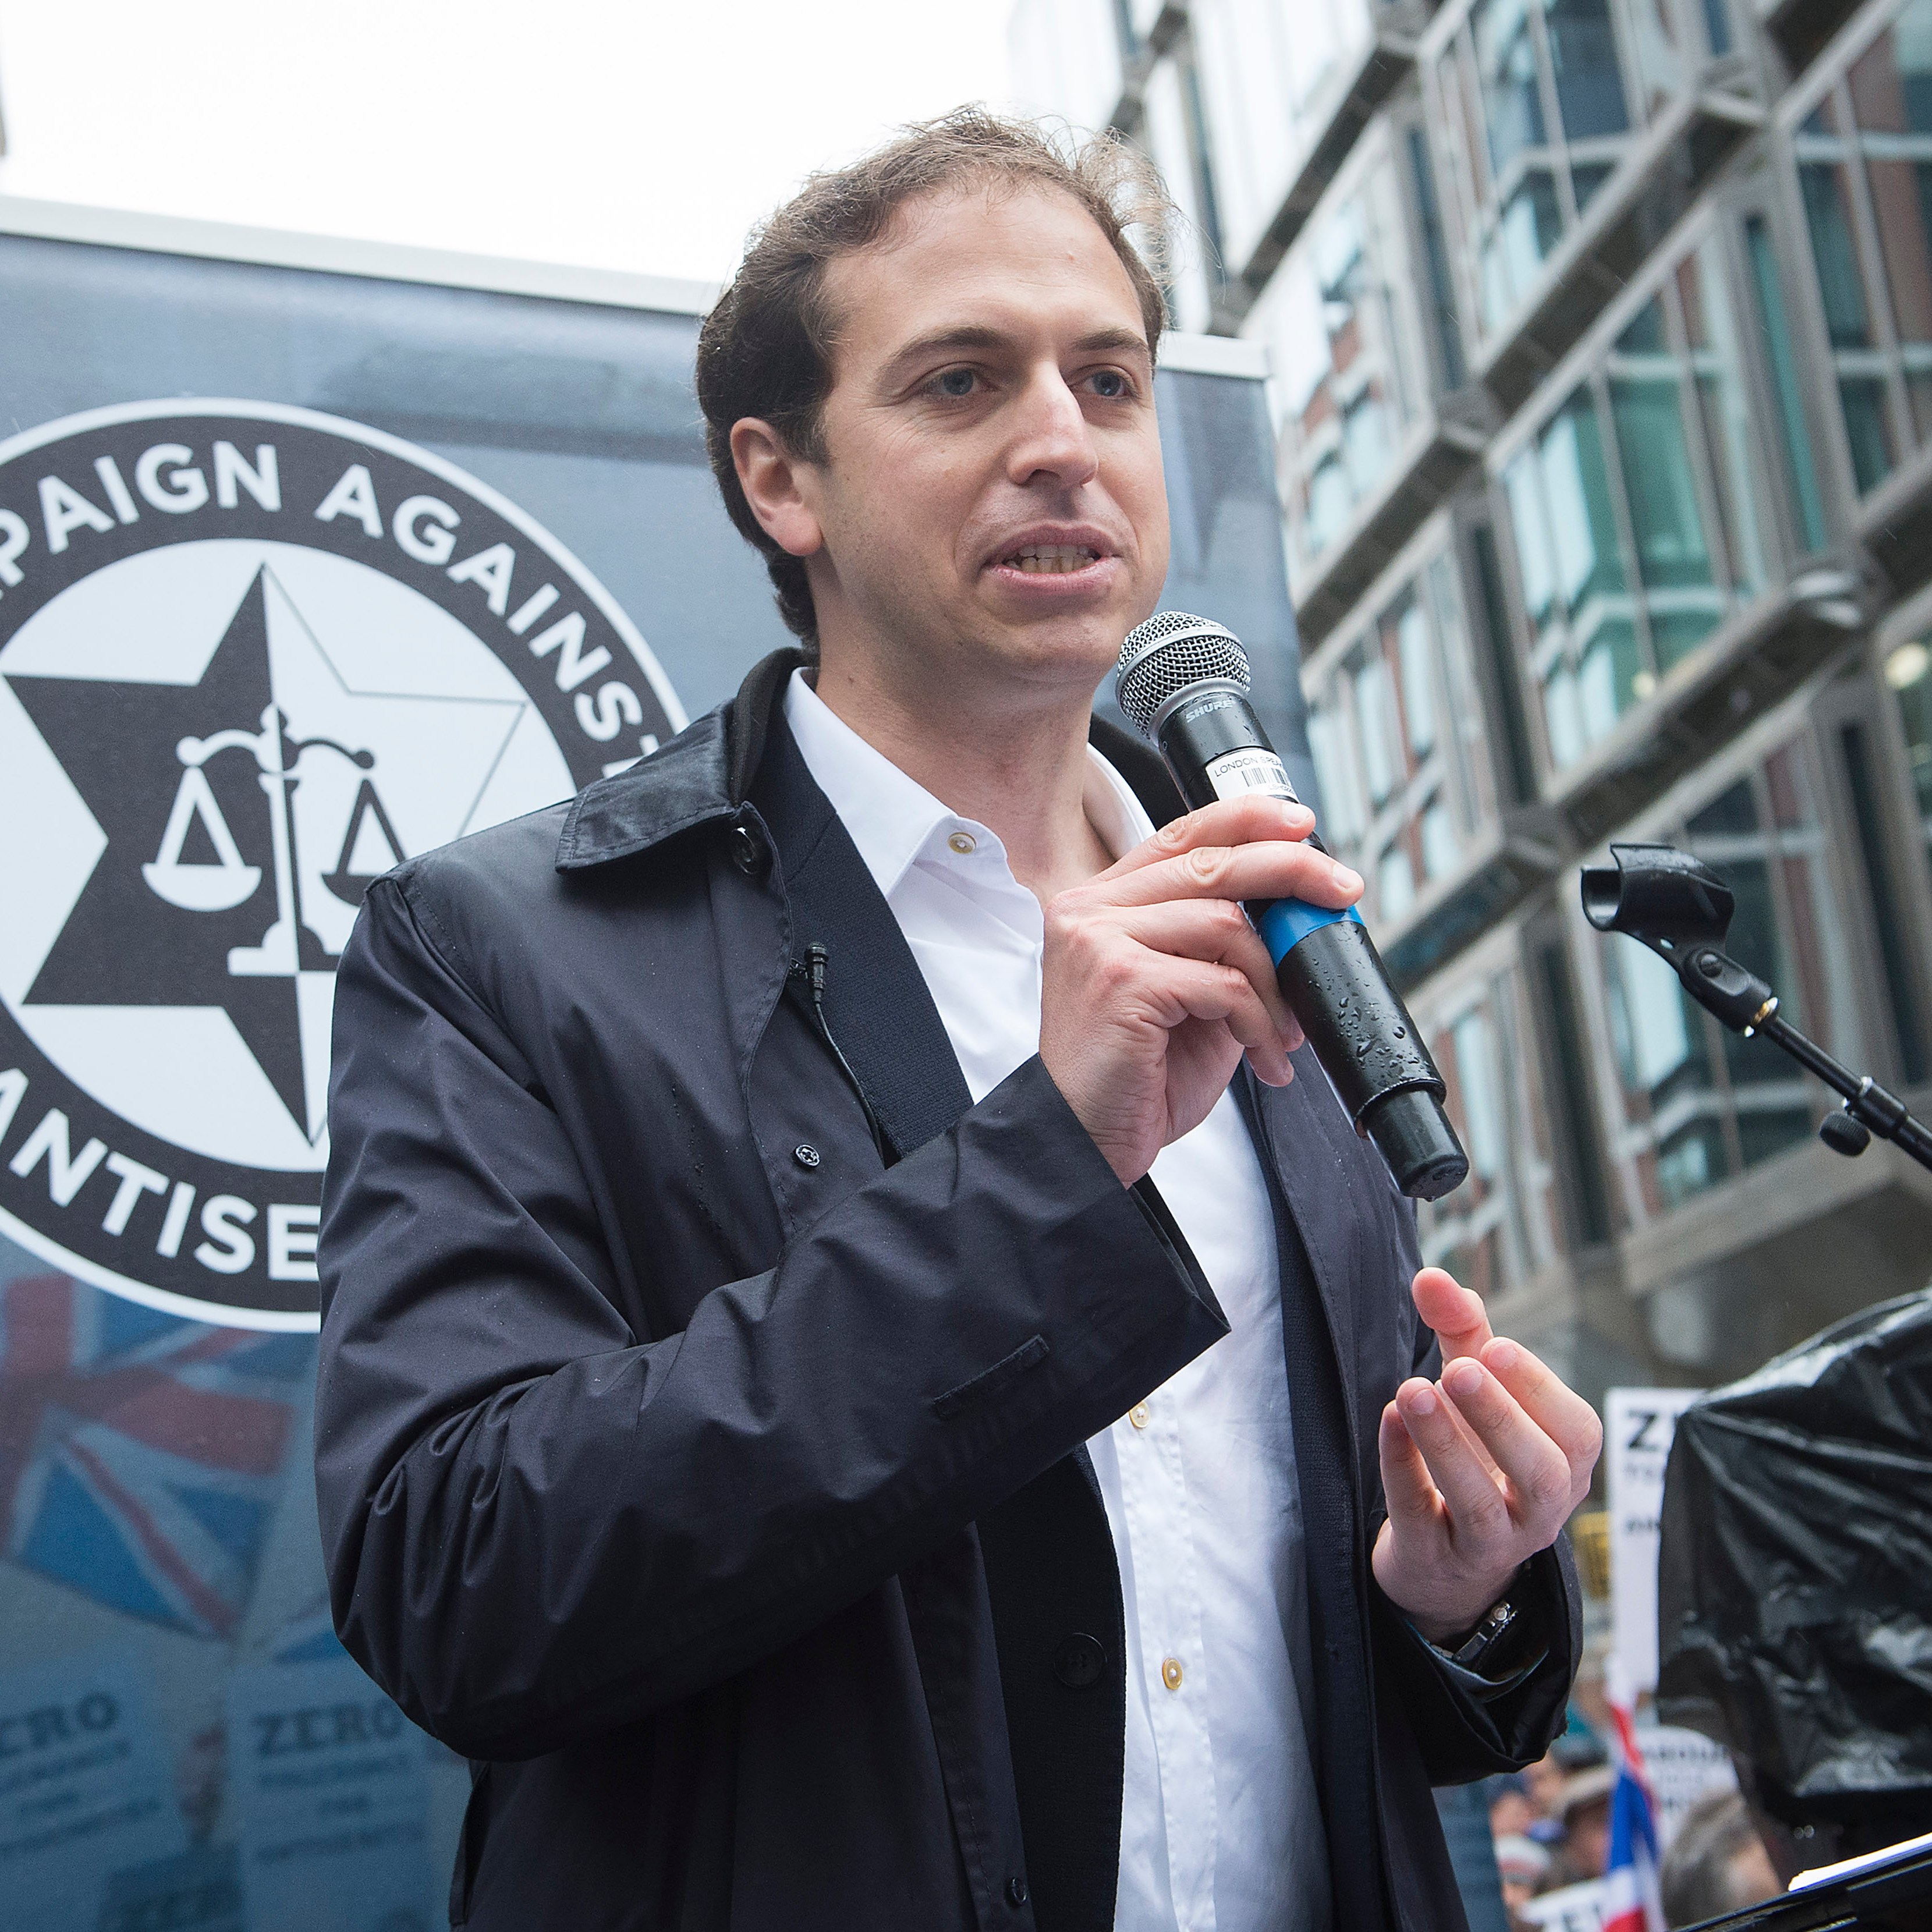 Gideon Falter, chief executive of the Campaign Against Antisemitism